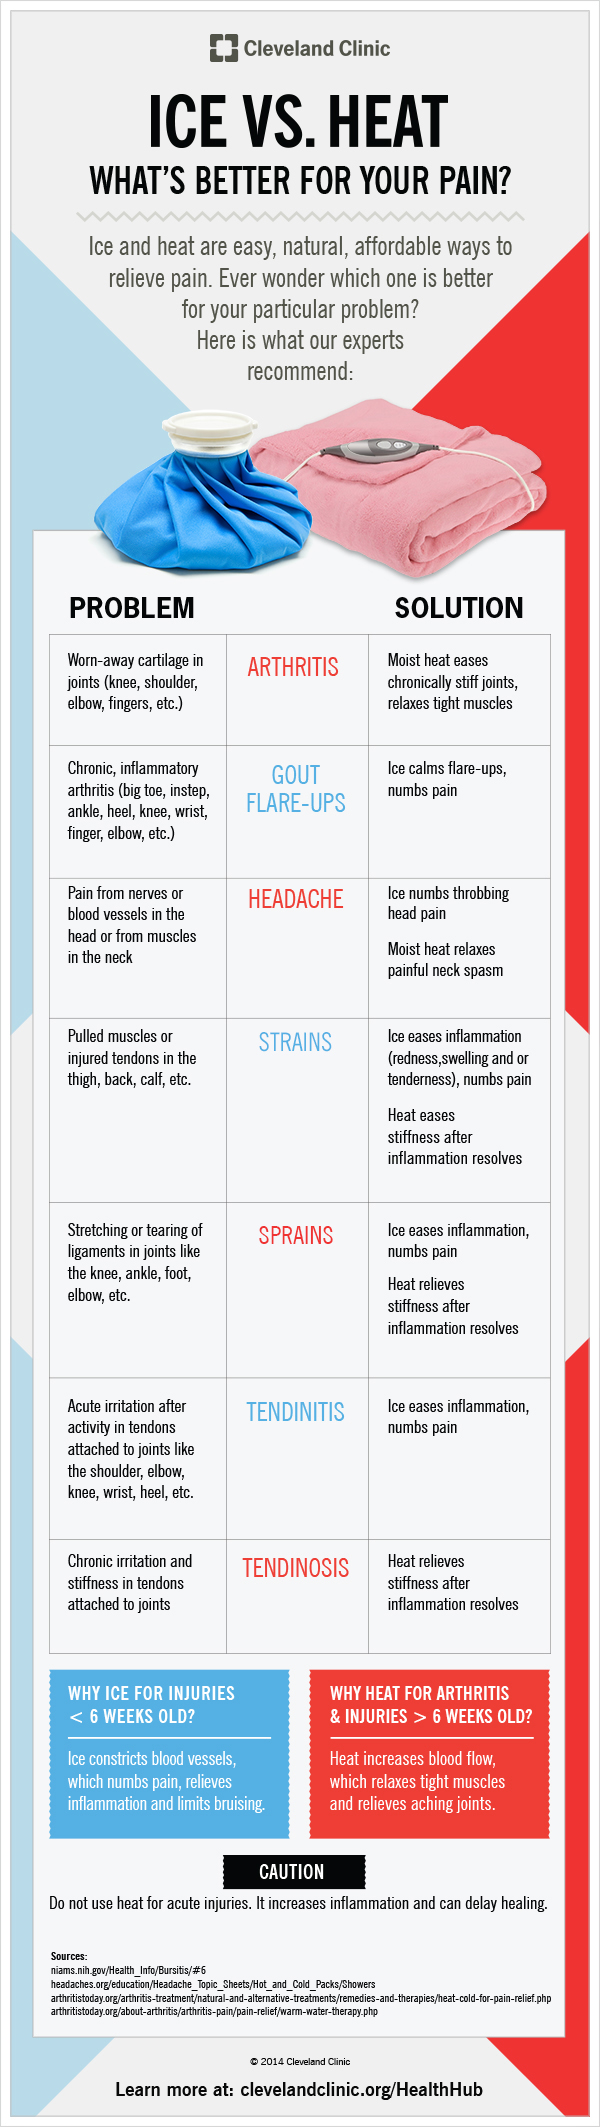 Know When To Use Heat Or Ice For Different Injuries [Infographic]